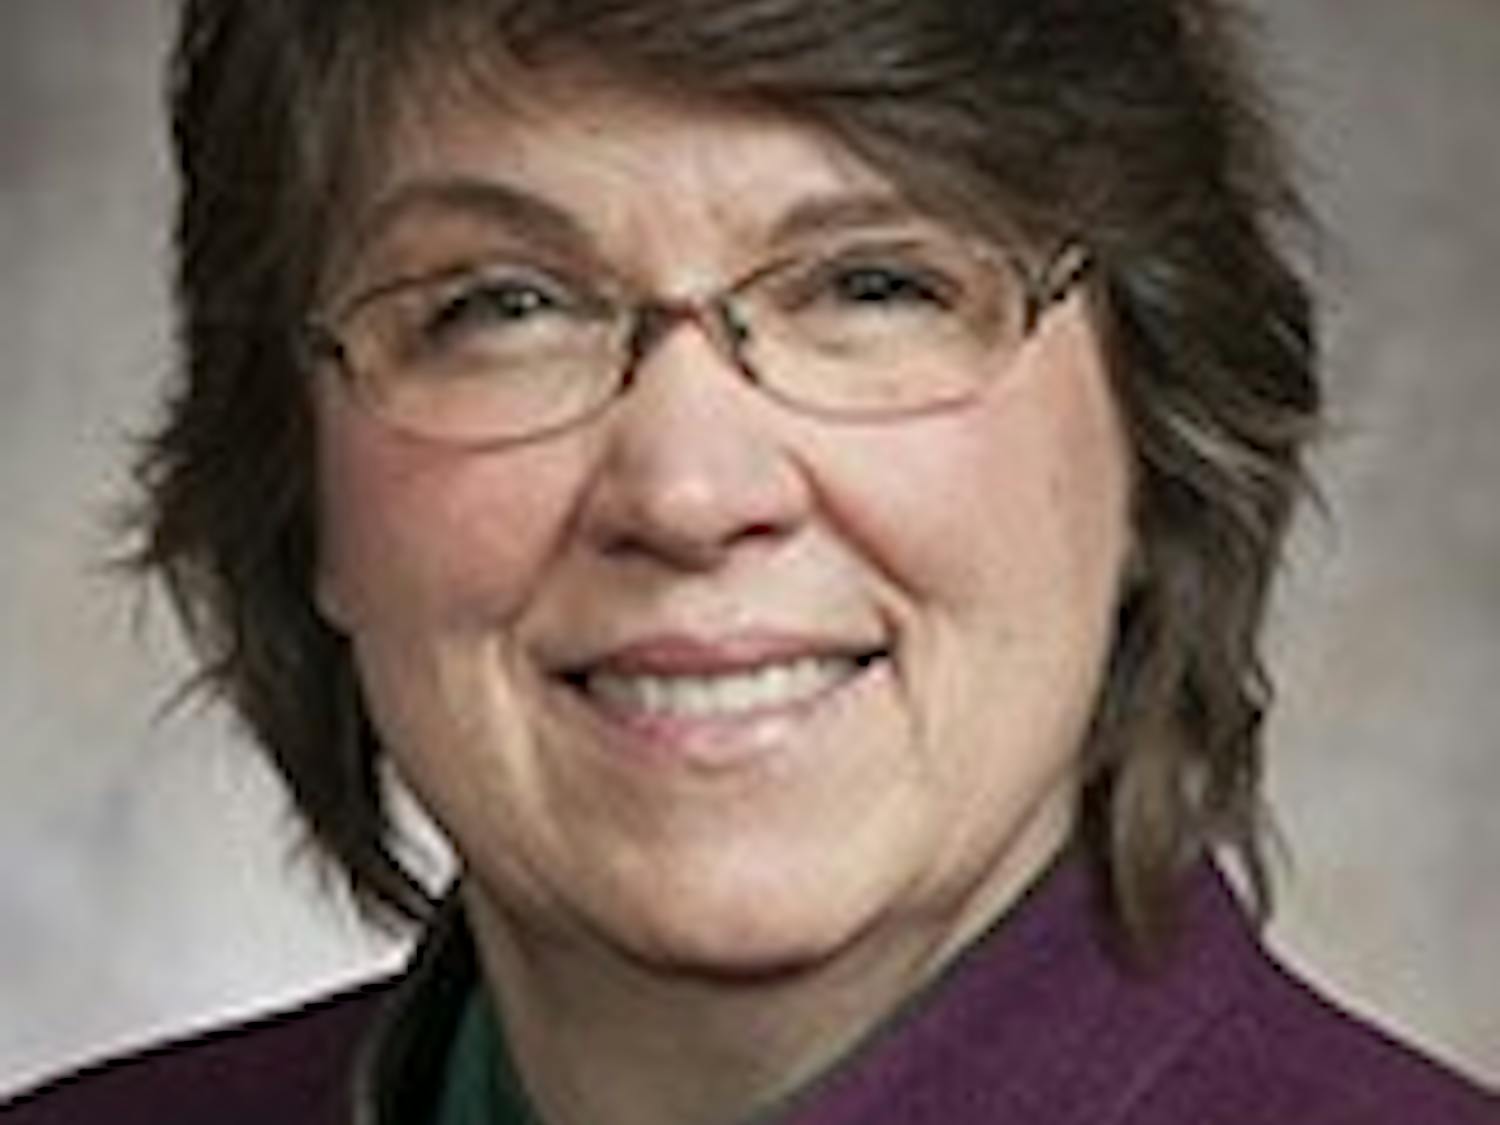 In 2015, gubernatorial candidate Kathleen Vinehout wrote a recommendation letter on behalf of a former Legislative Council attorney who was found guilty of felony possession of child pornography.